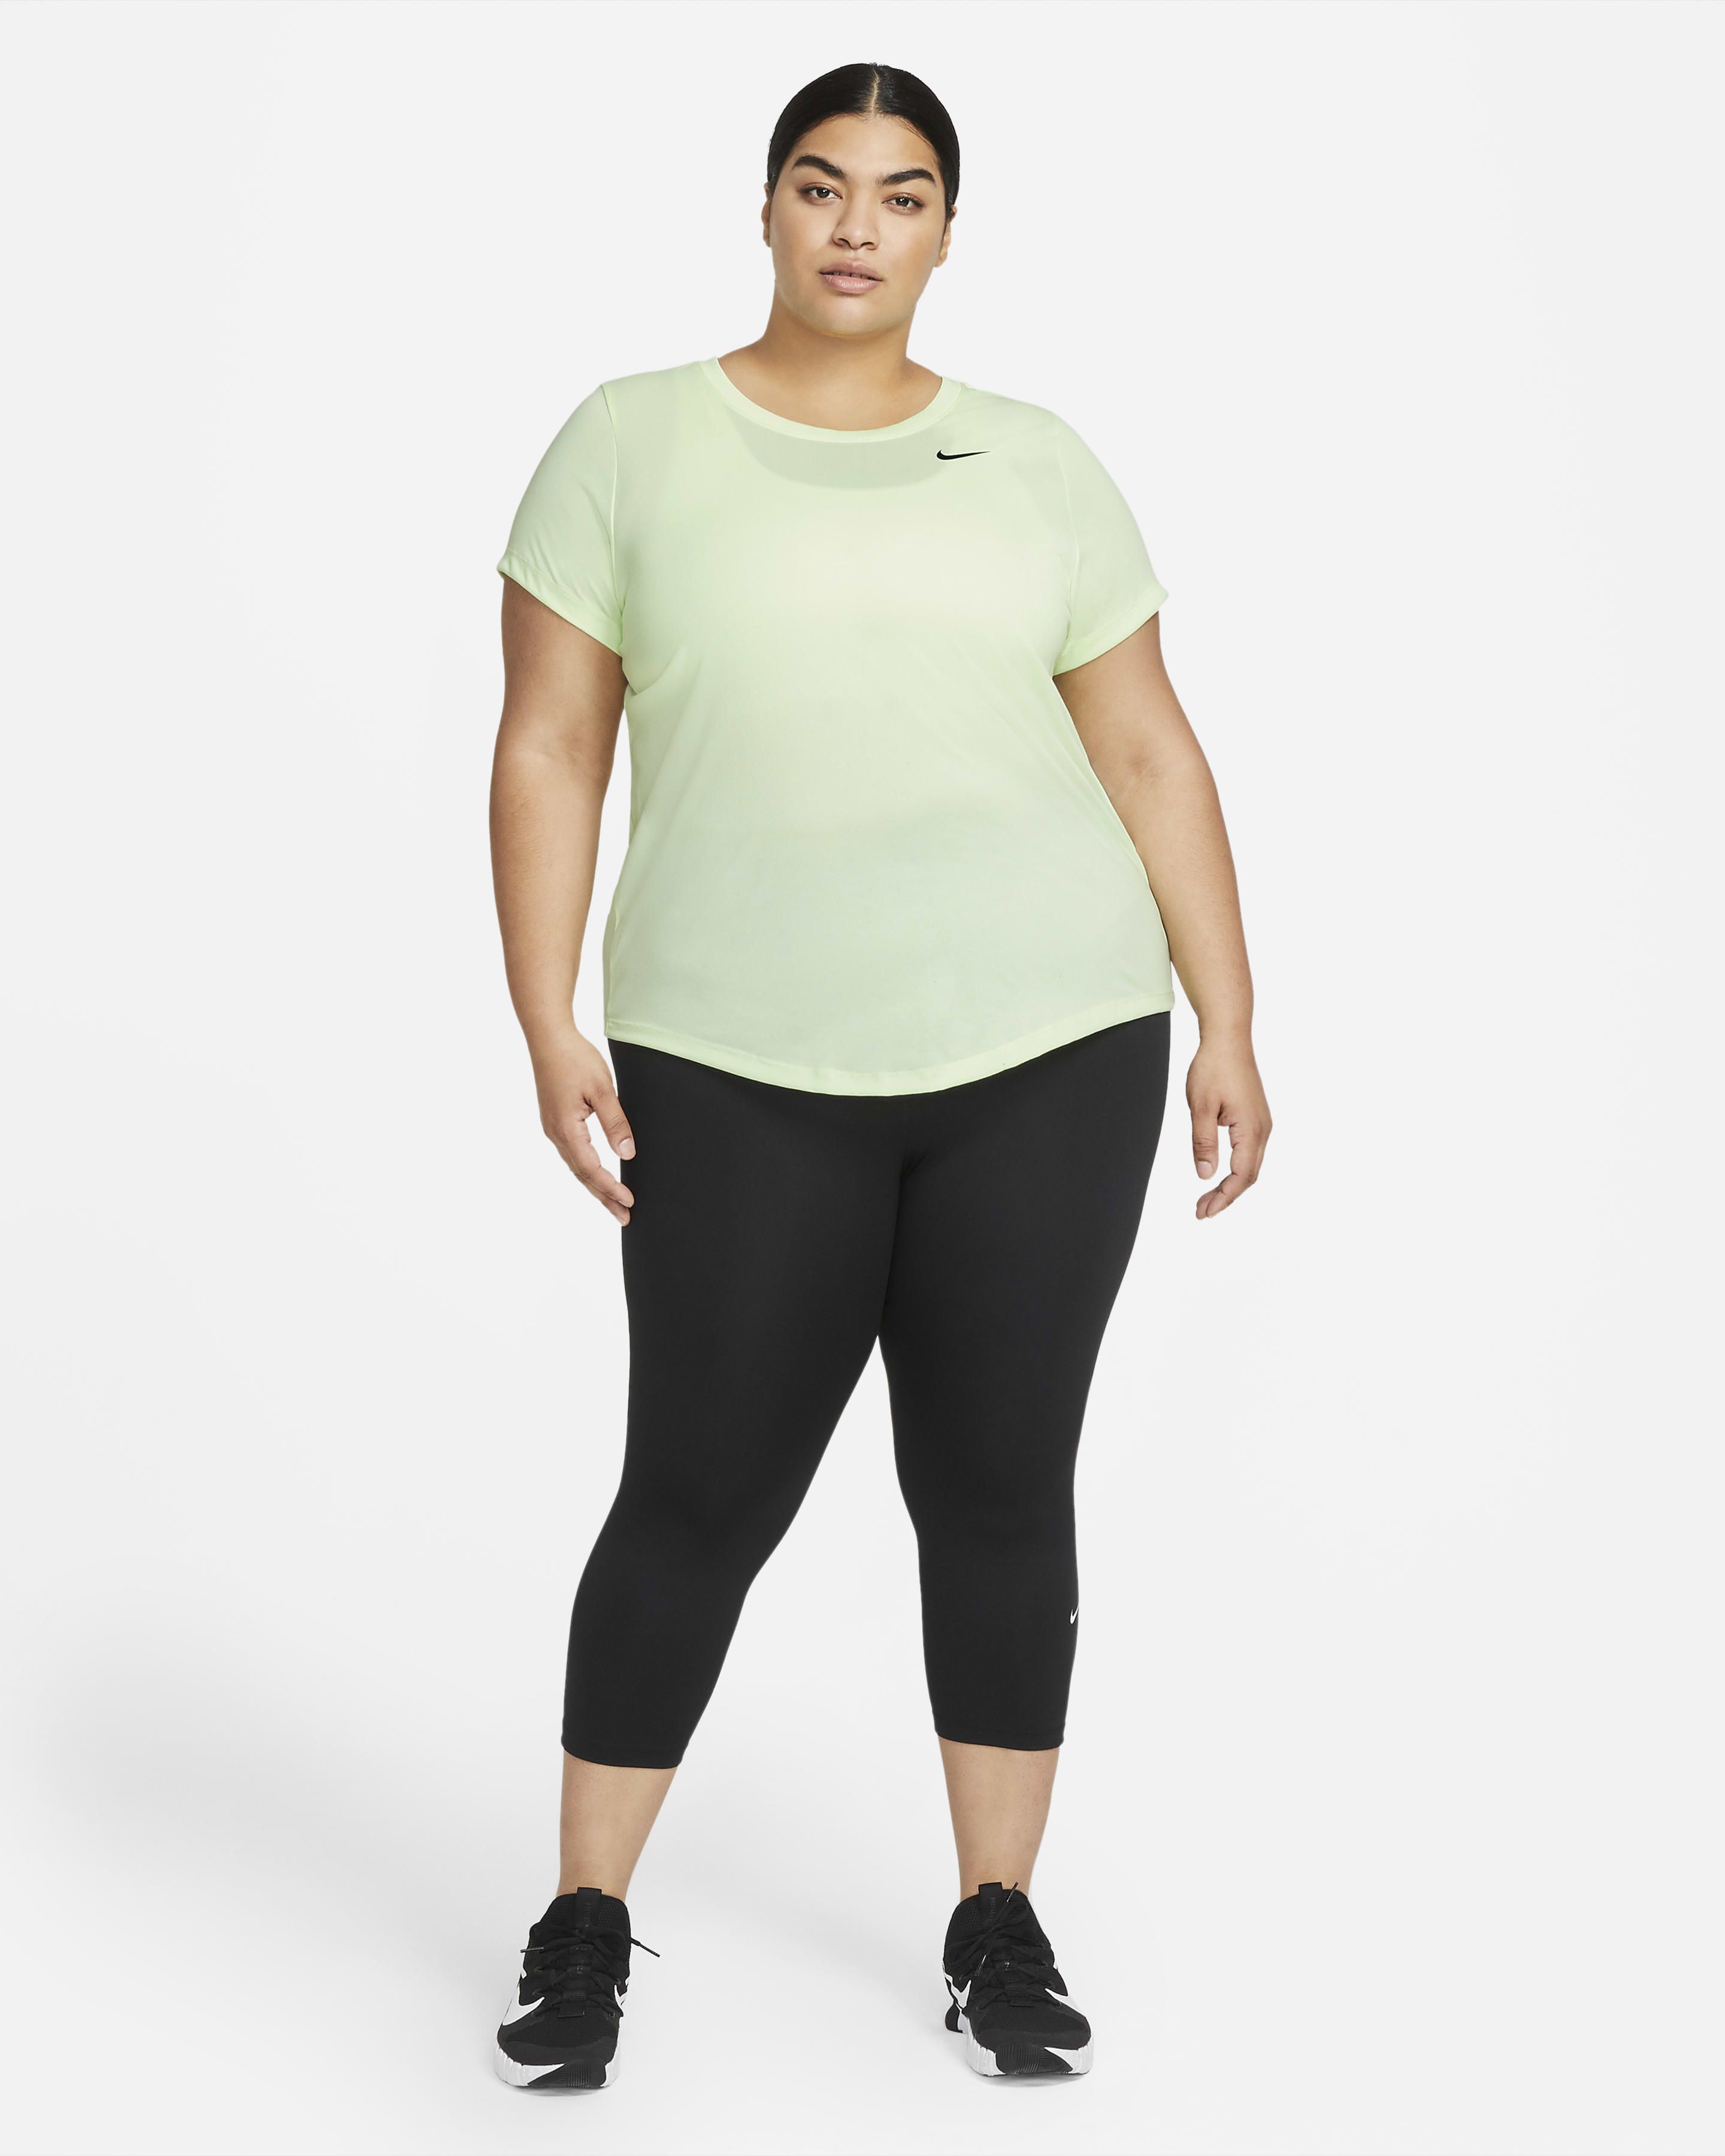 Workout Clothes for Plus-Size Women | Gear for Plus-Size Runners